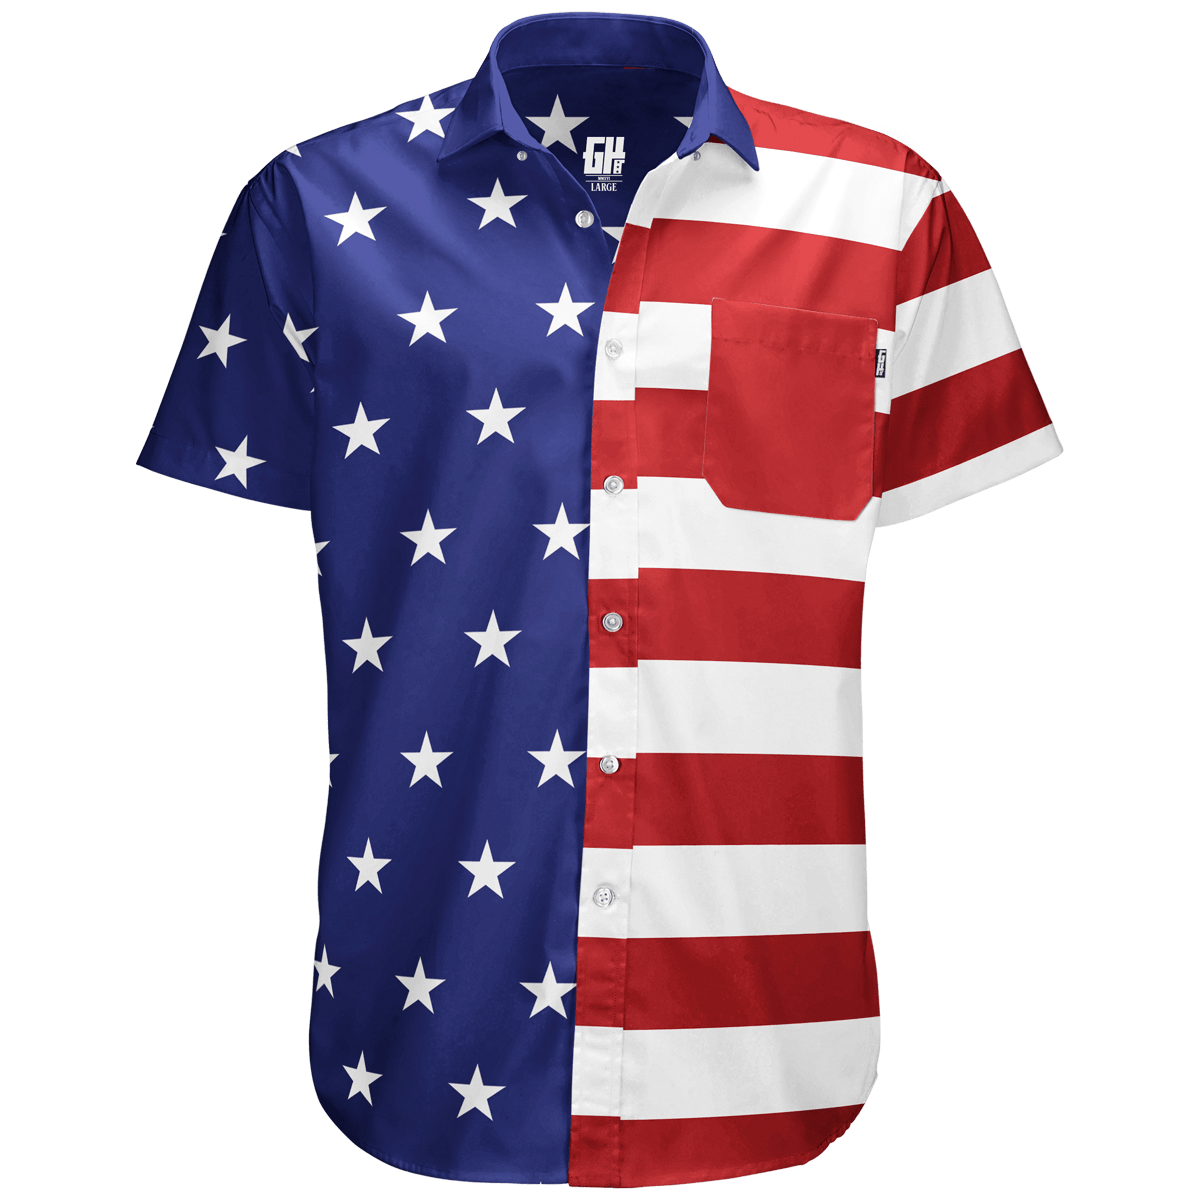 Thumbnail for American Flag Button Down - Greater Half